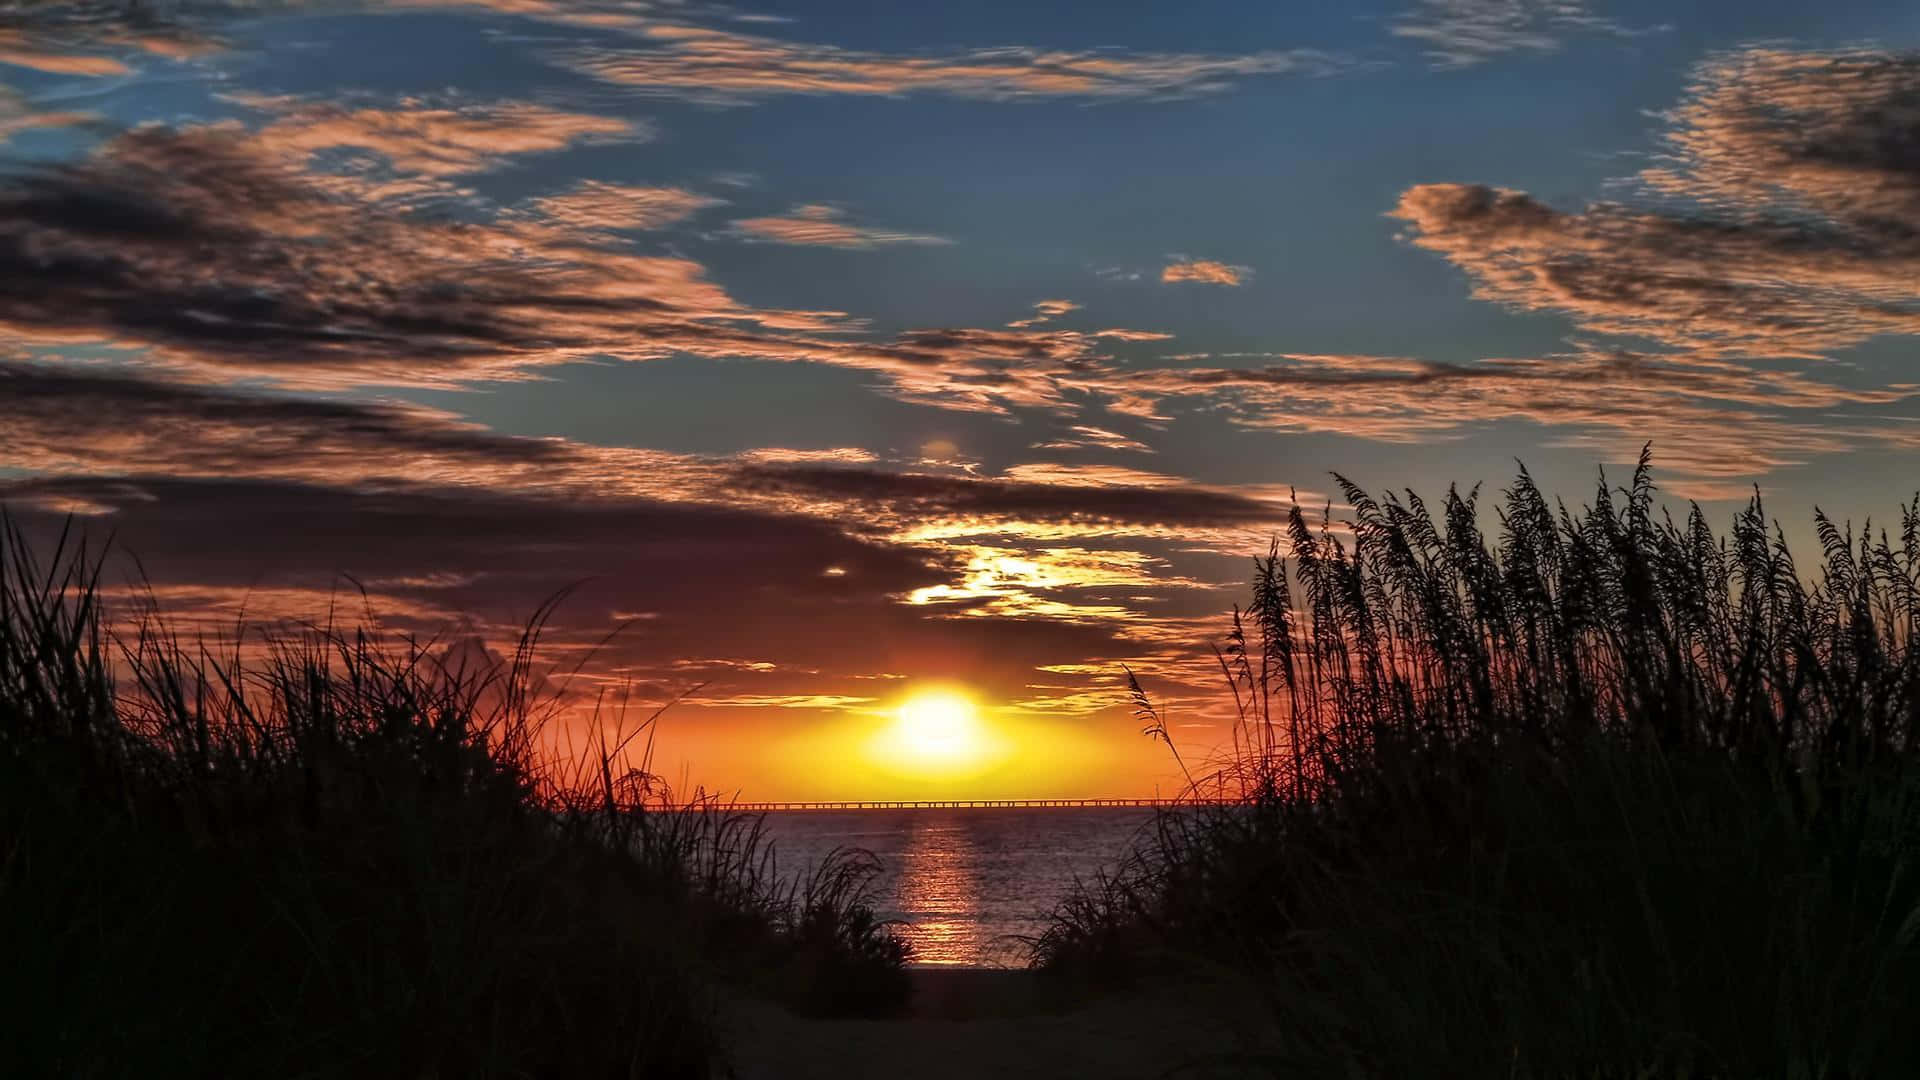 A Sunset Over A Beach With Tall Grasses